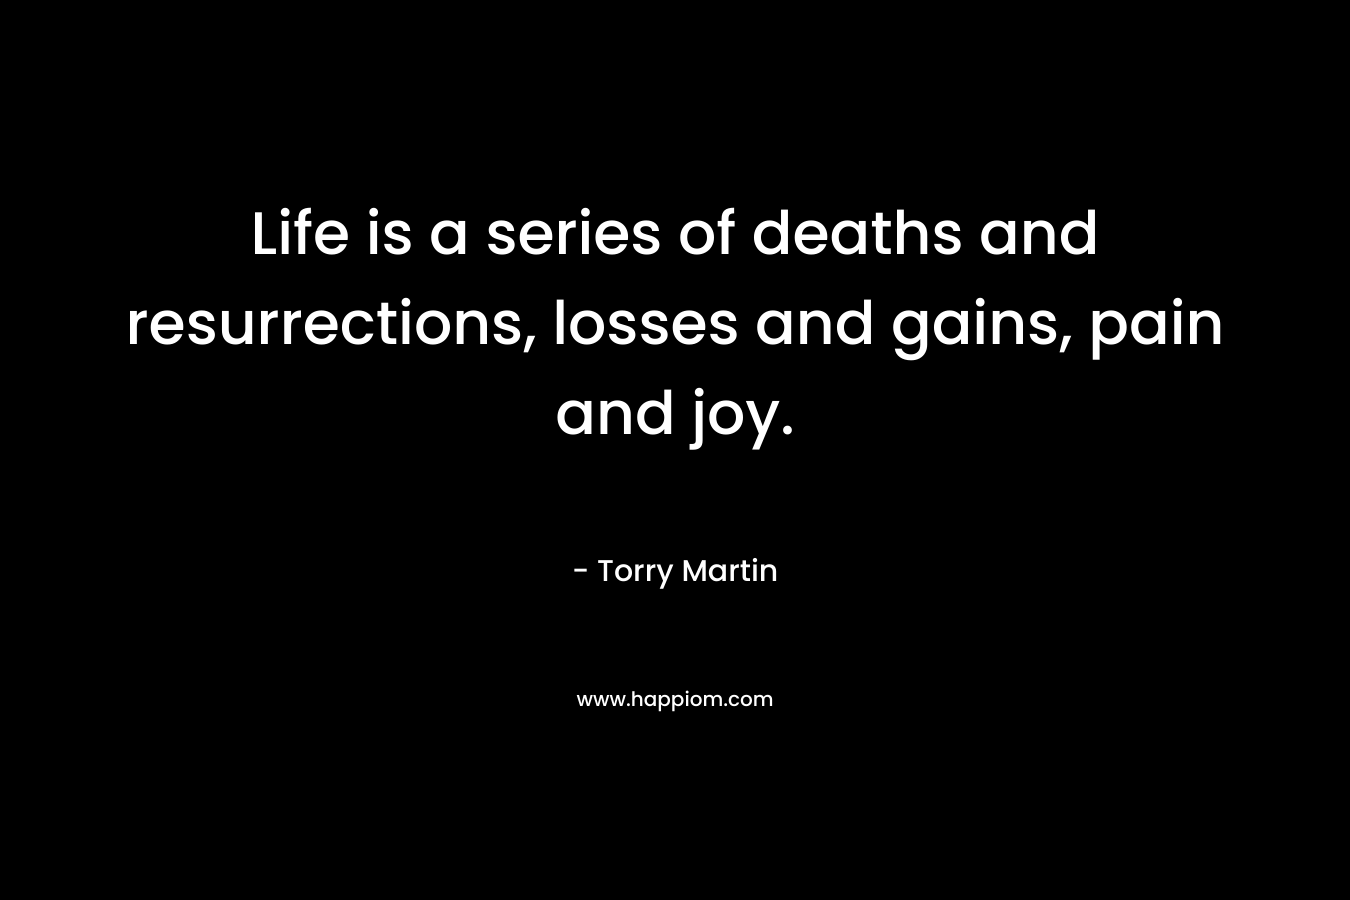 Life is a series of deaths and resurrections, losses and gains, pain and joy.